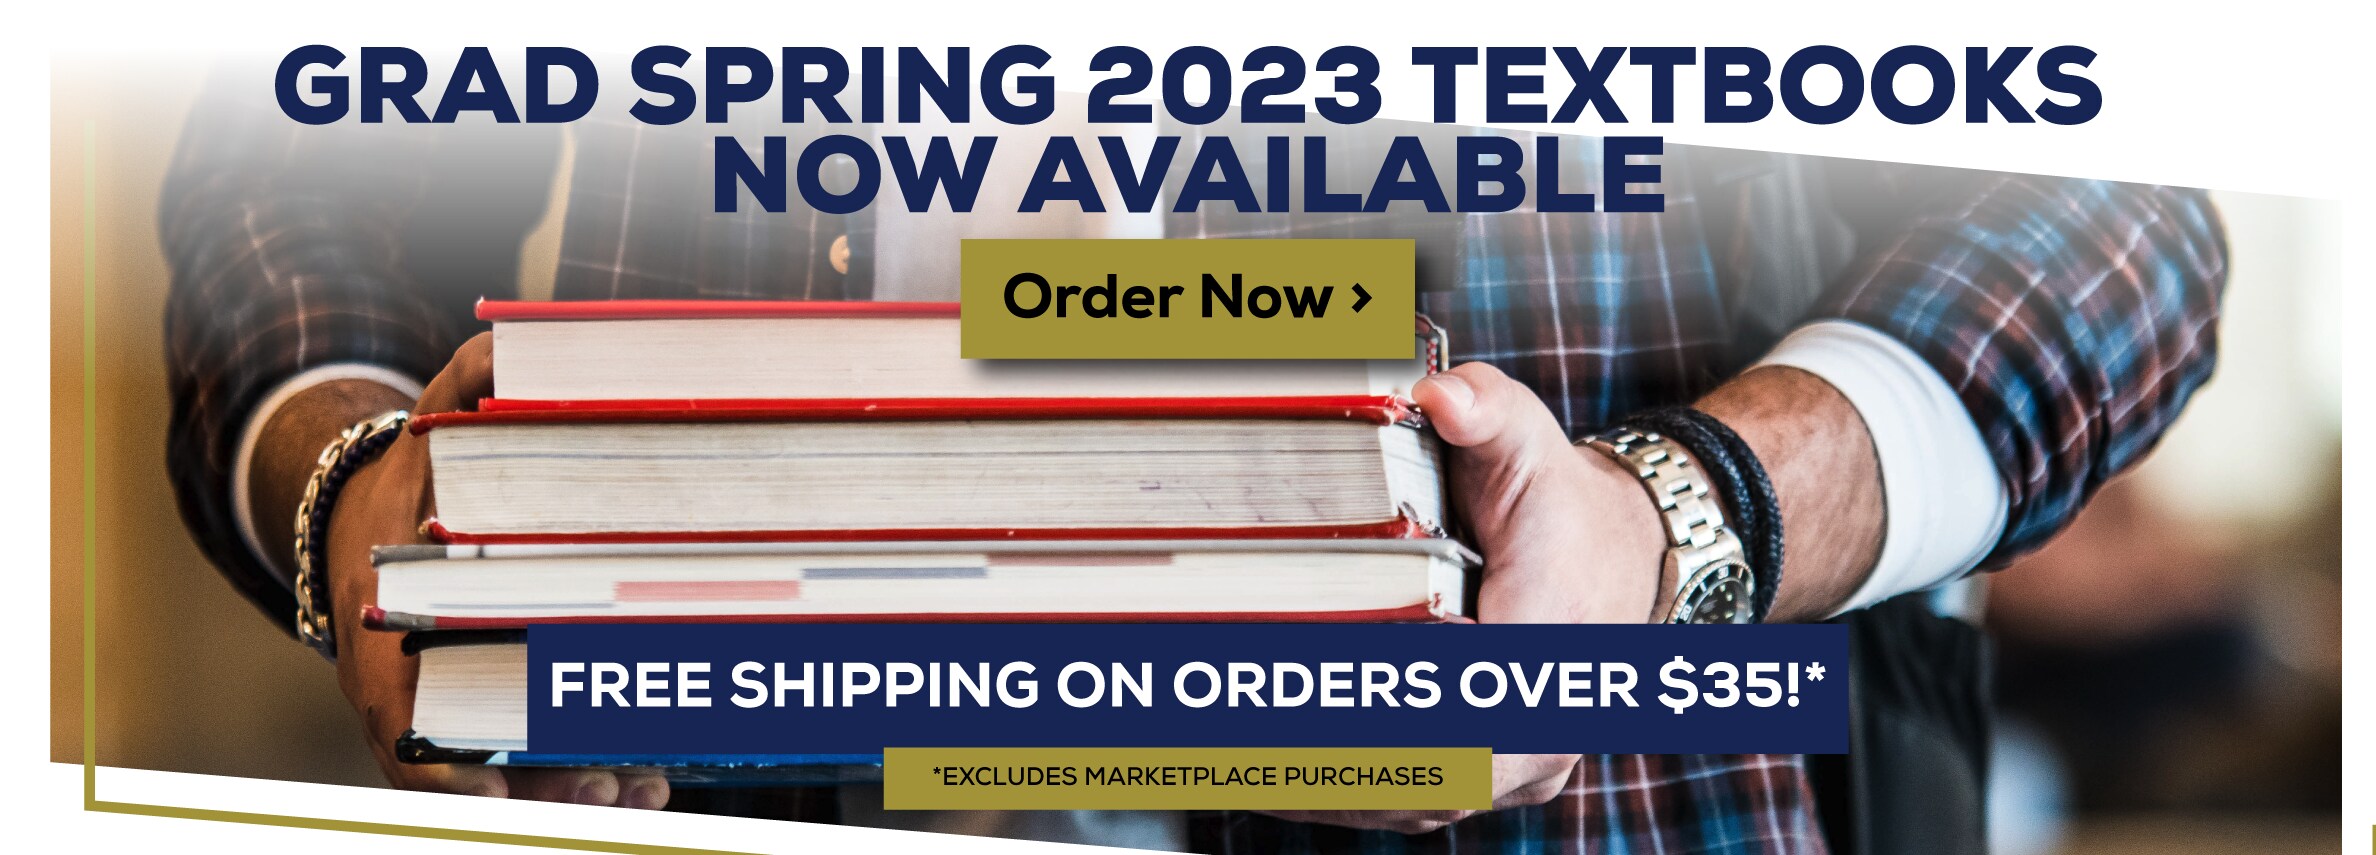 Grad Spring 2023 Textbooks Now Available. Free shipping on all orders over $35! Excludes Marketplace Purchases. Order now